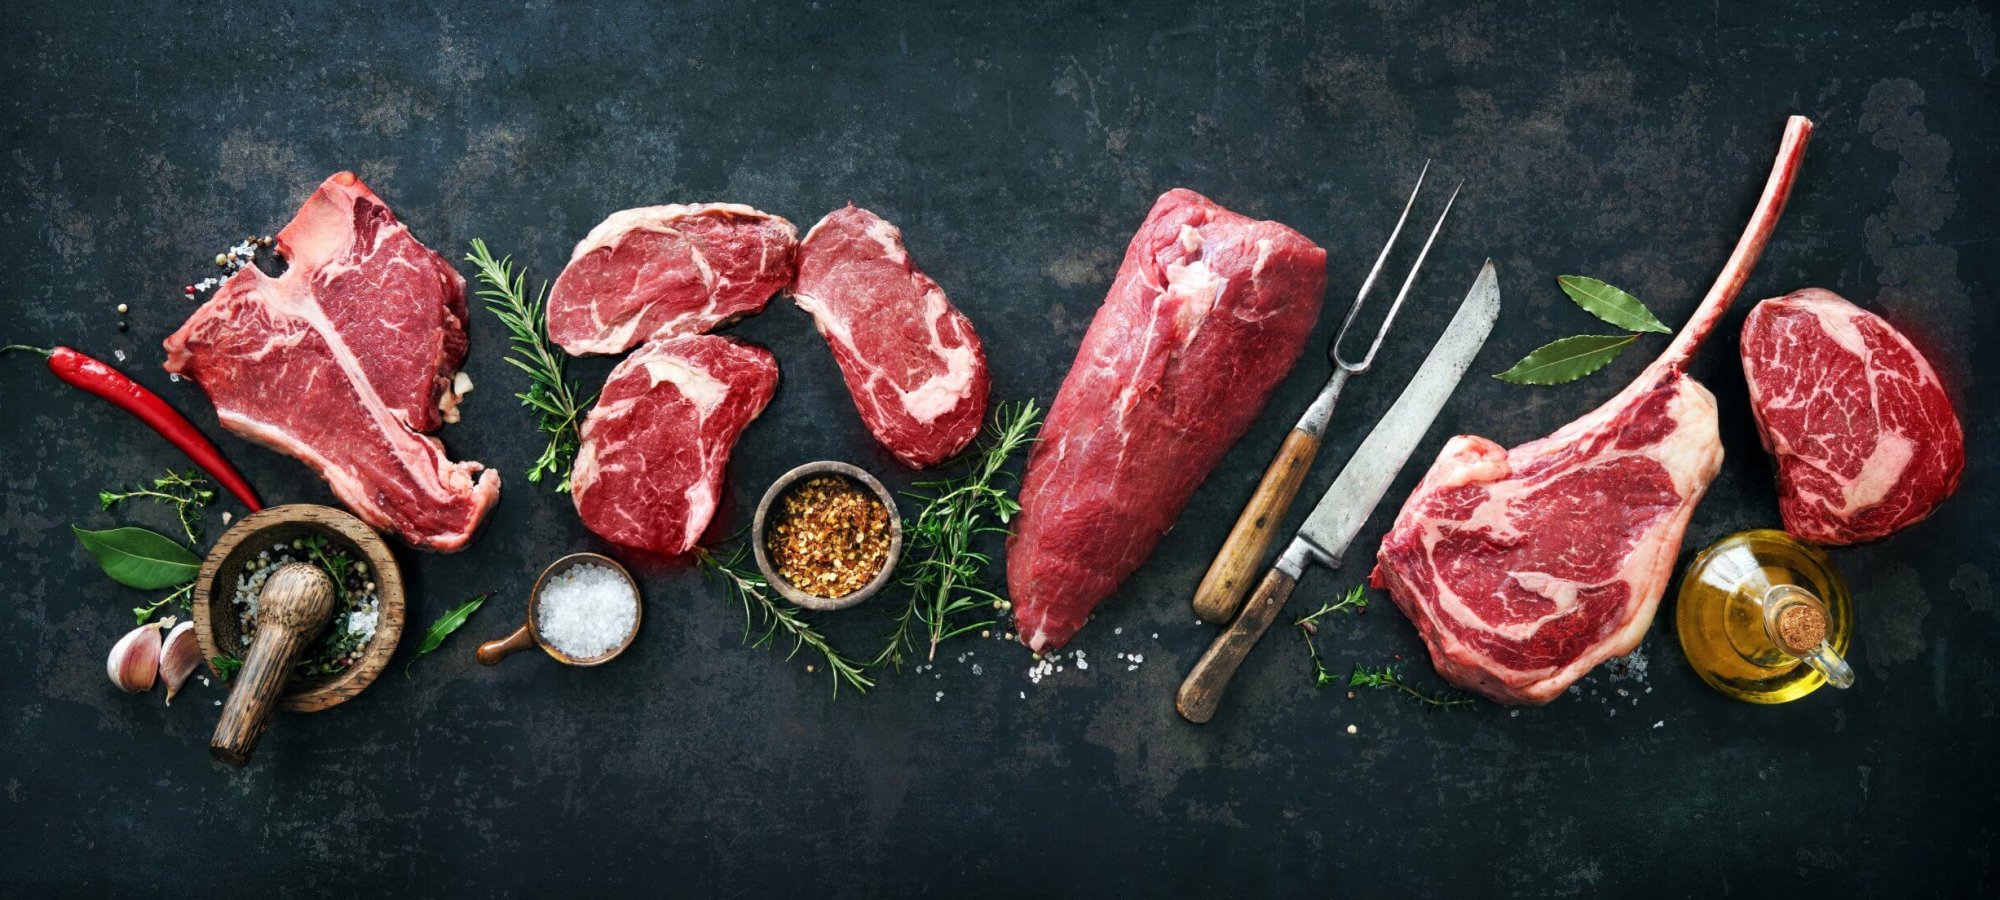 Variety,Of,Raw,Beef,Meat,Steaks,For,Grilling,With,Seasoning